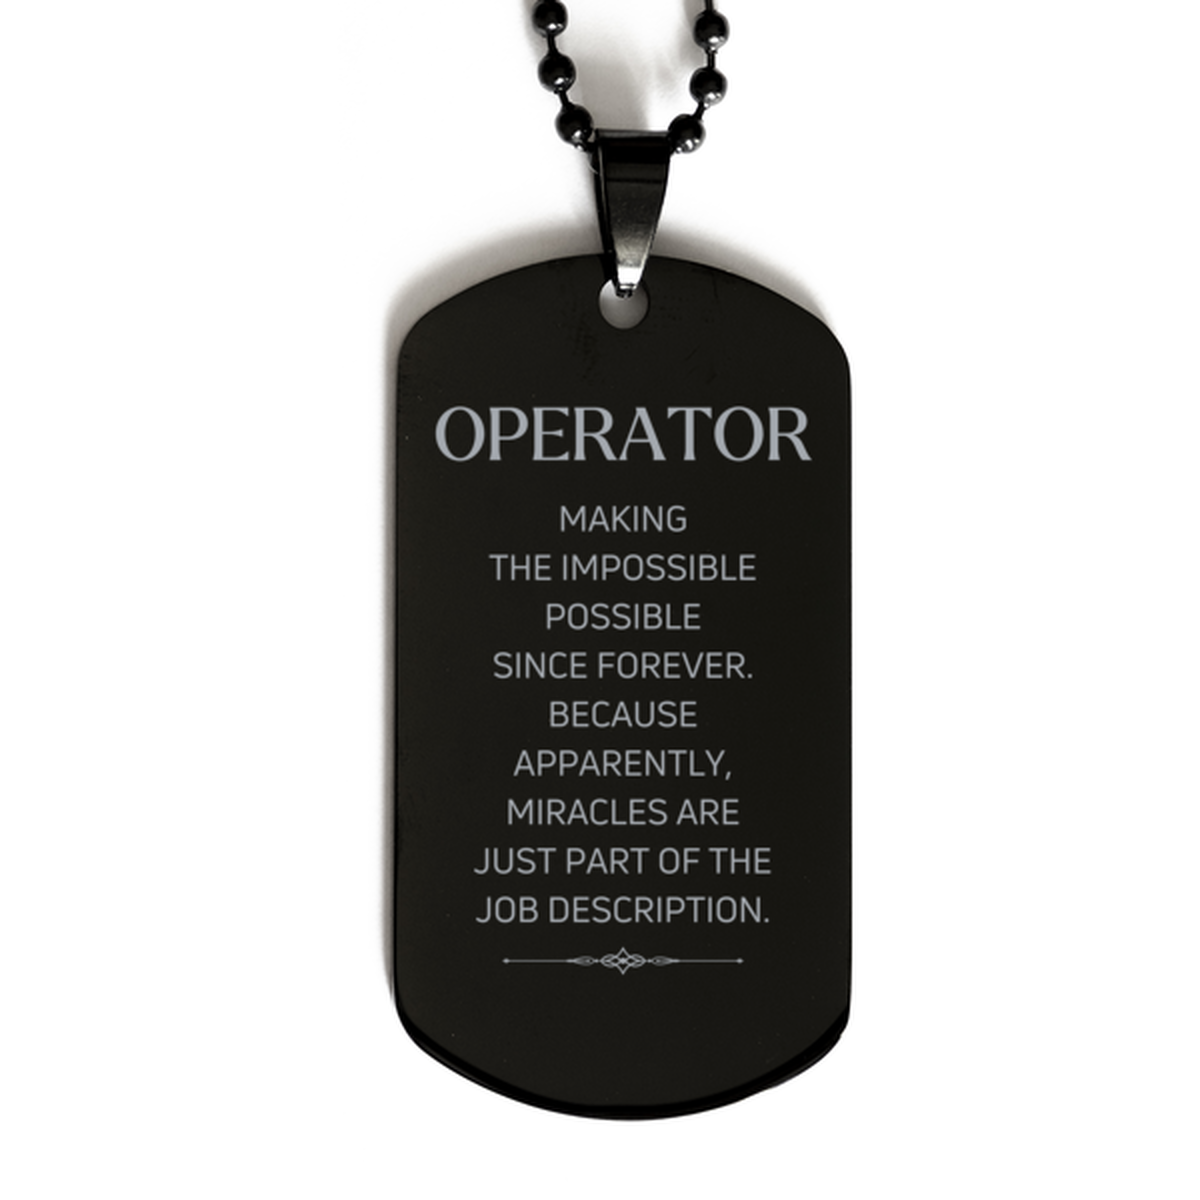 Funny Operator Gifts, Miracles are just part of the job description, Inspirational Birthday Black Dog Tag For Operator, Men, Women, Coworkers, Friends, Boss